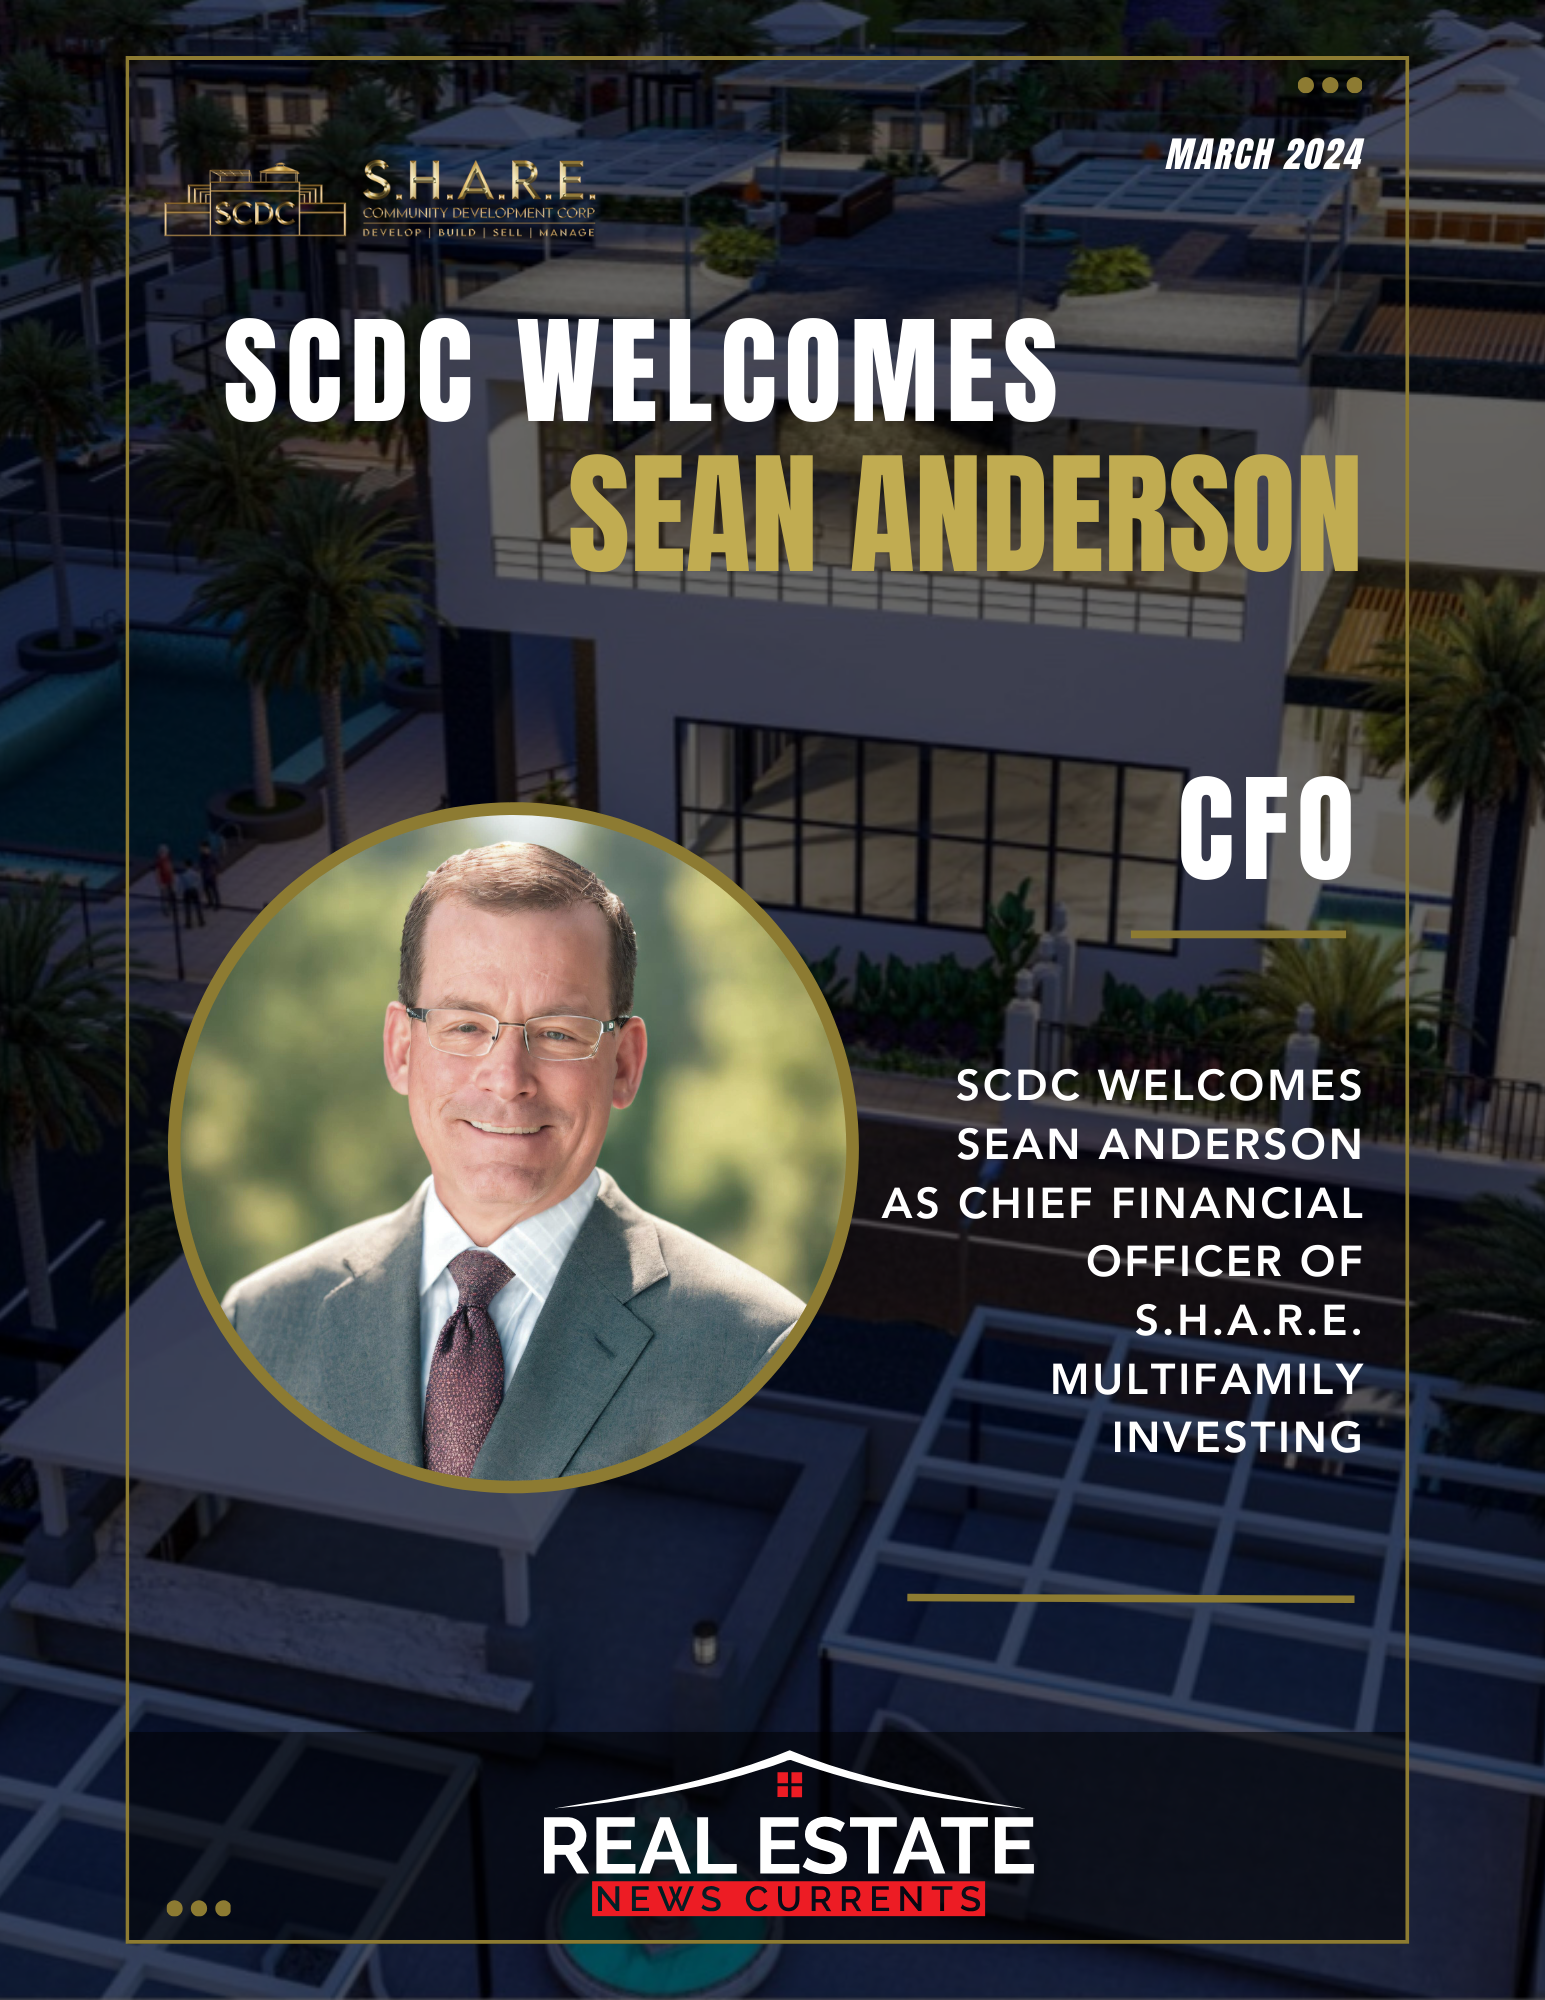 SCDC Welcomes Sean Anderson as Chief Financial Officer of S.H.A.R.E. Multifamily Investments